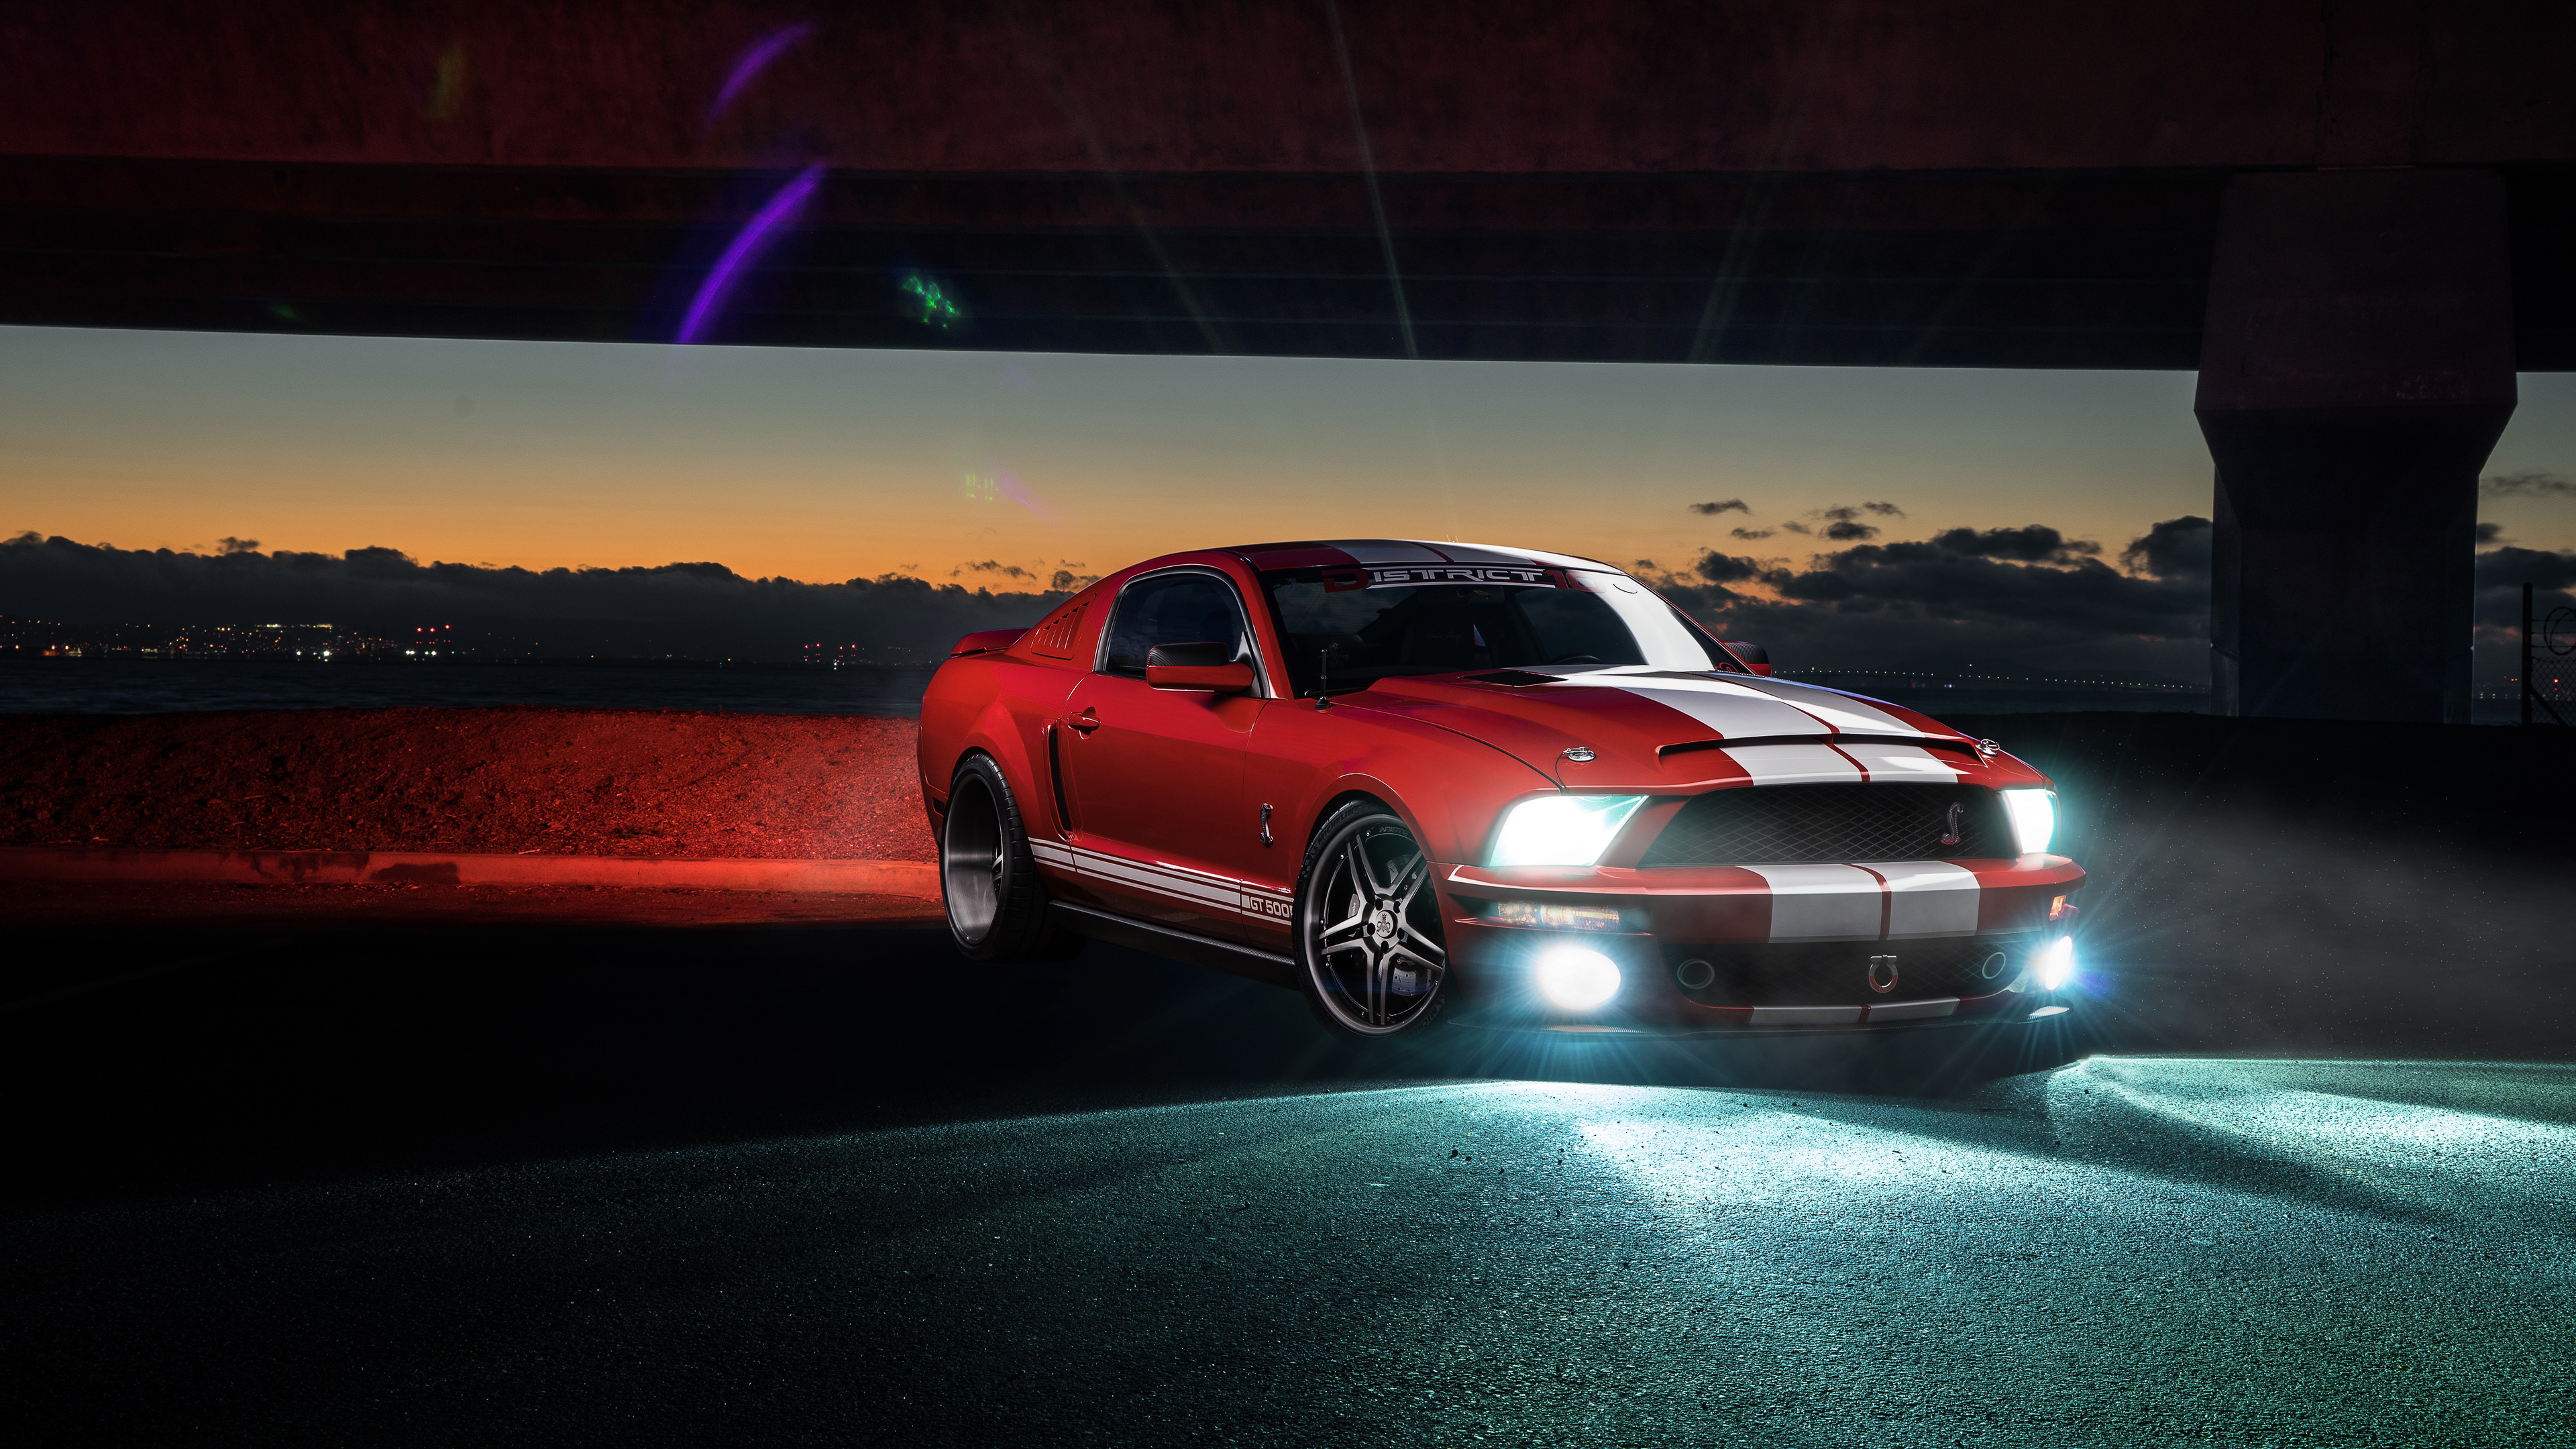 Ford Shelby 4k Shelby Wallpapers Hd Wallpapers Cars Wallpapers 8k Wallpapers 5k Wallpapers 4k Mustang Wallpaper Ford Mustang Gt Ford Mustang Shelby Gt500